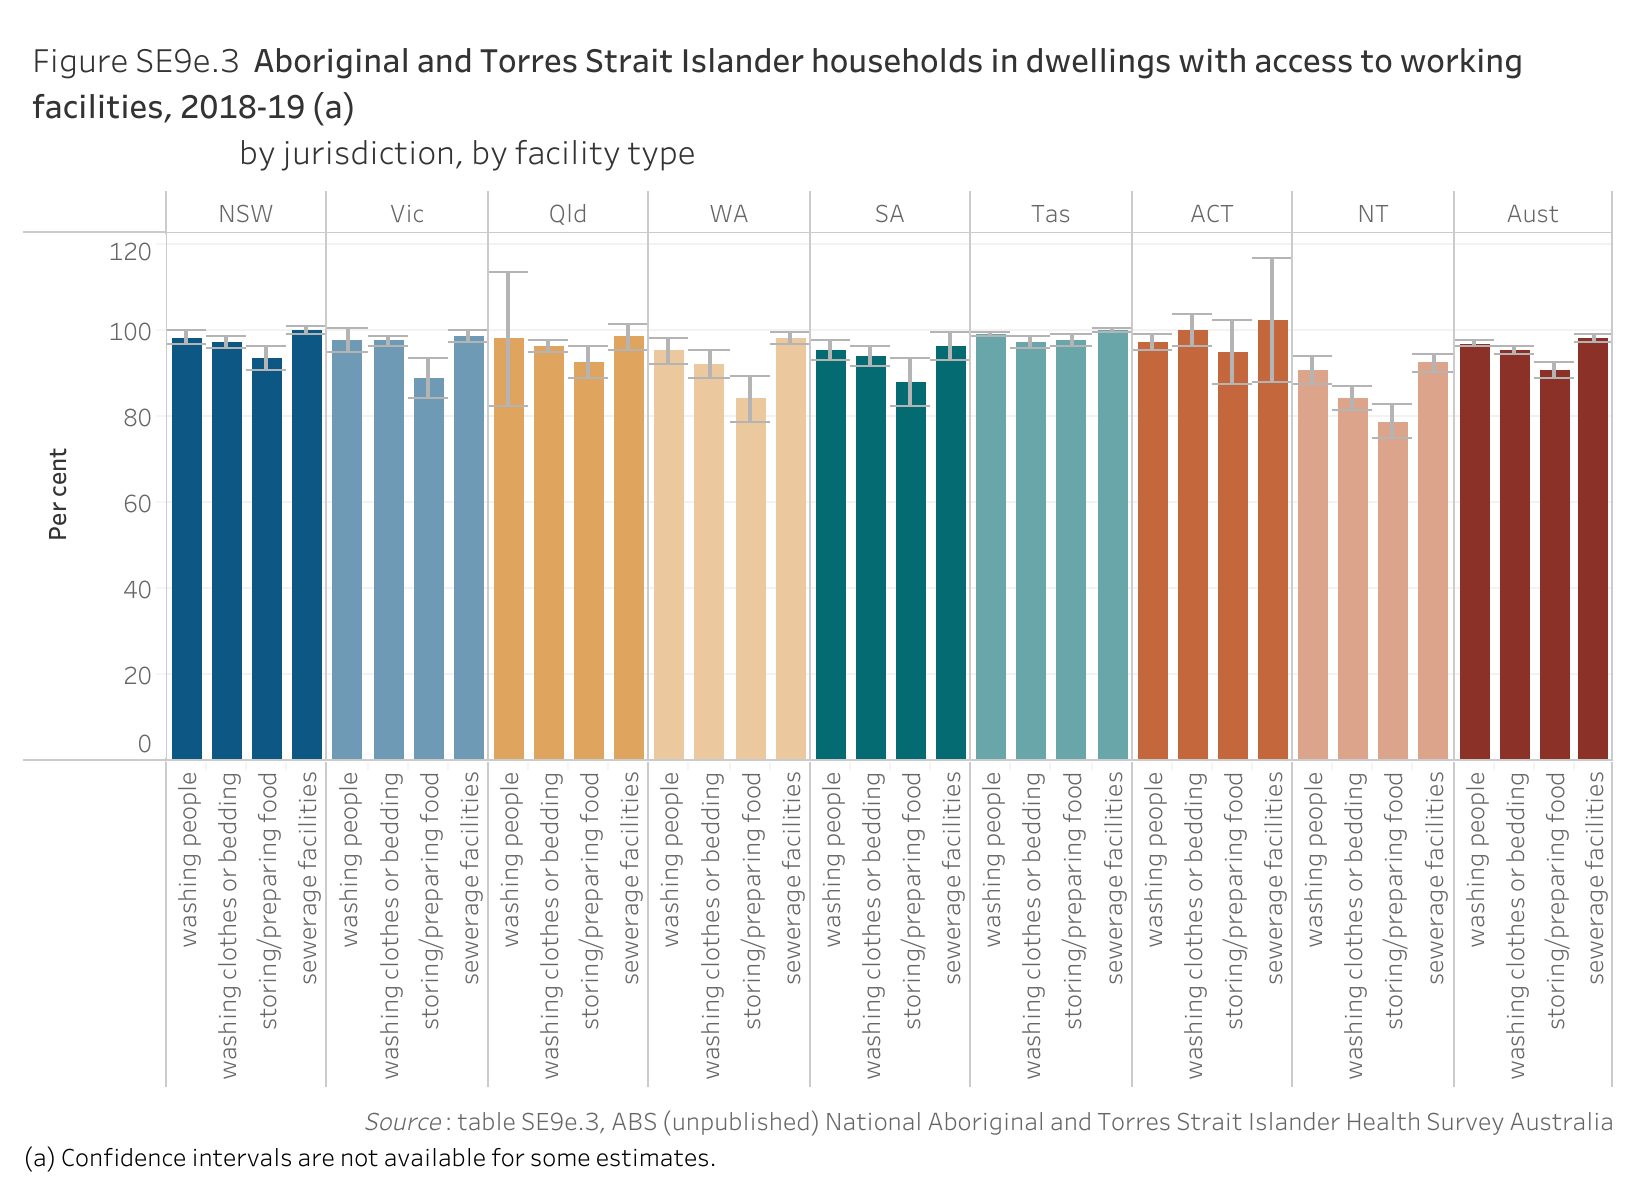 Figure SE9e.3 shows Aboriginal and Torres Strait Islander households in dwellings with access to working facilities, 2018-19, by jurisdiction, by facility type. More details can be found within the text near this image.